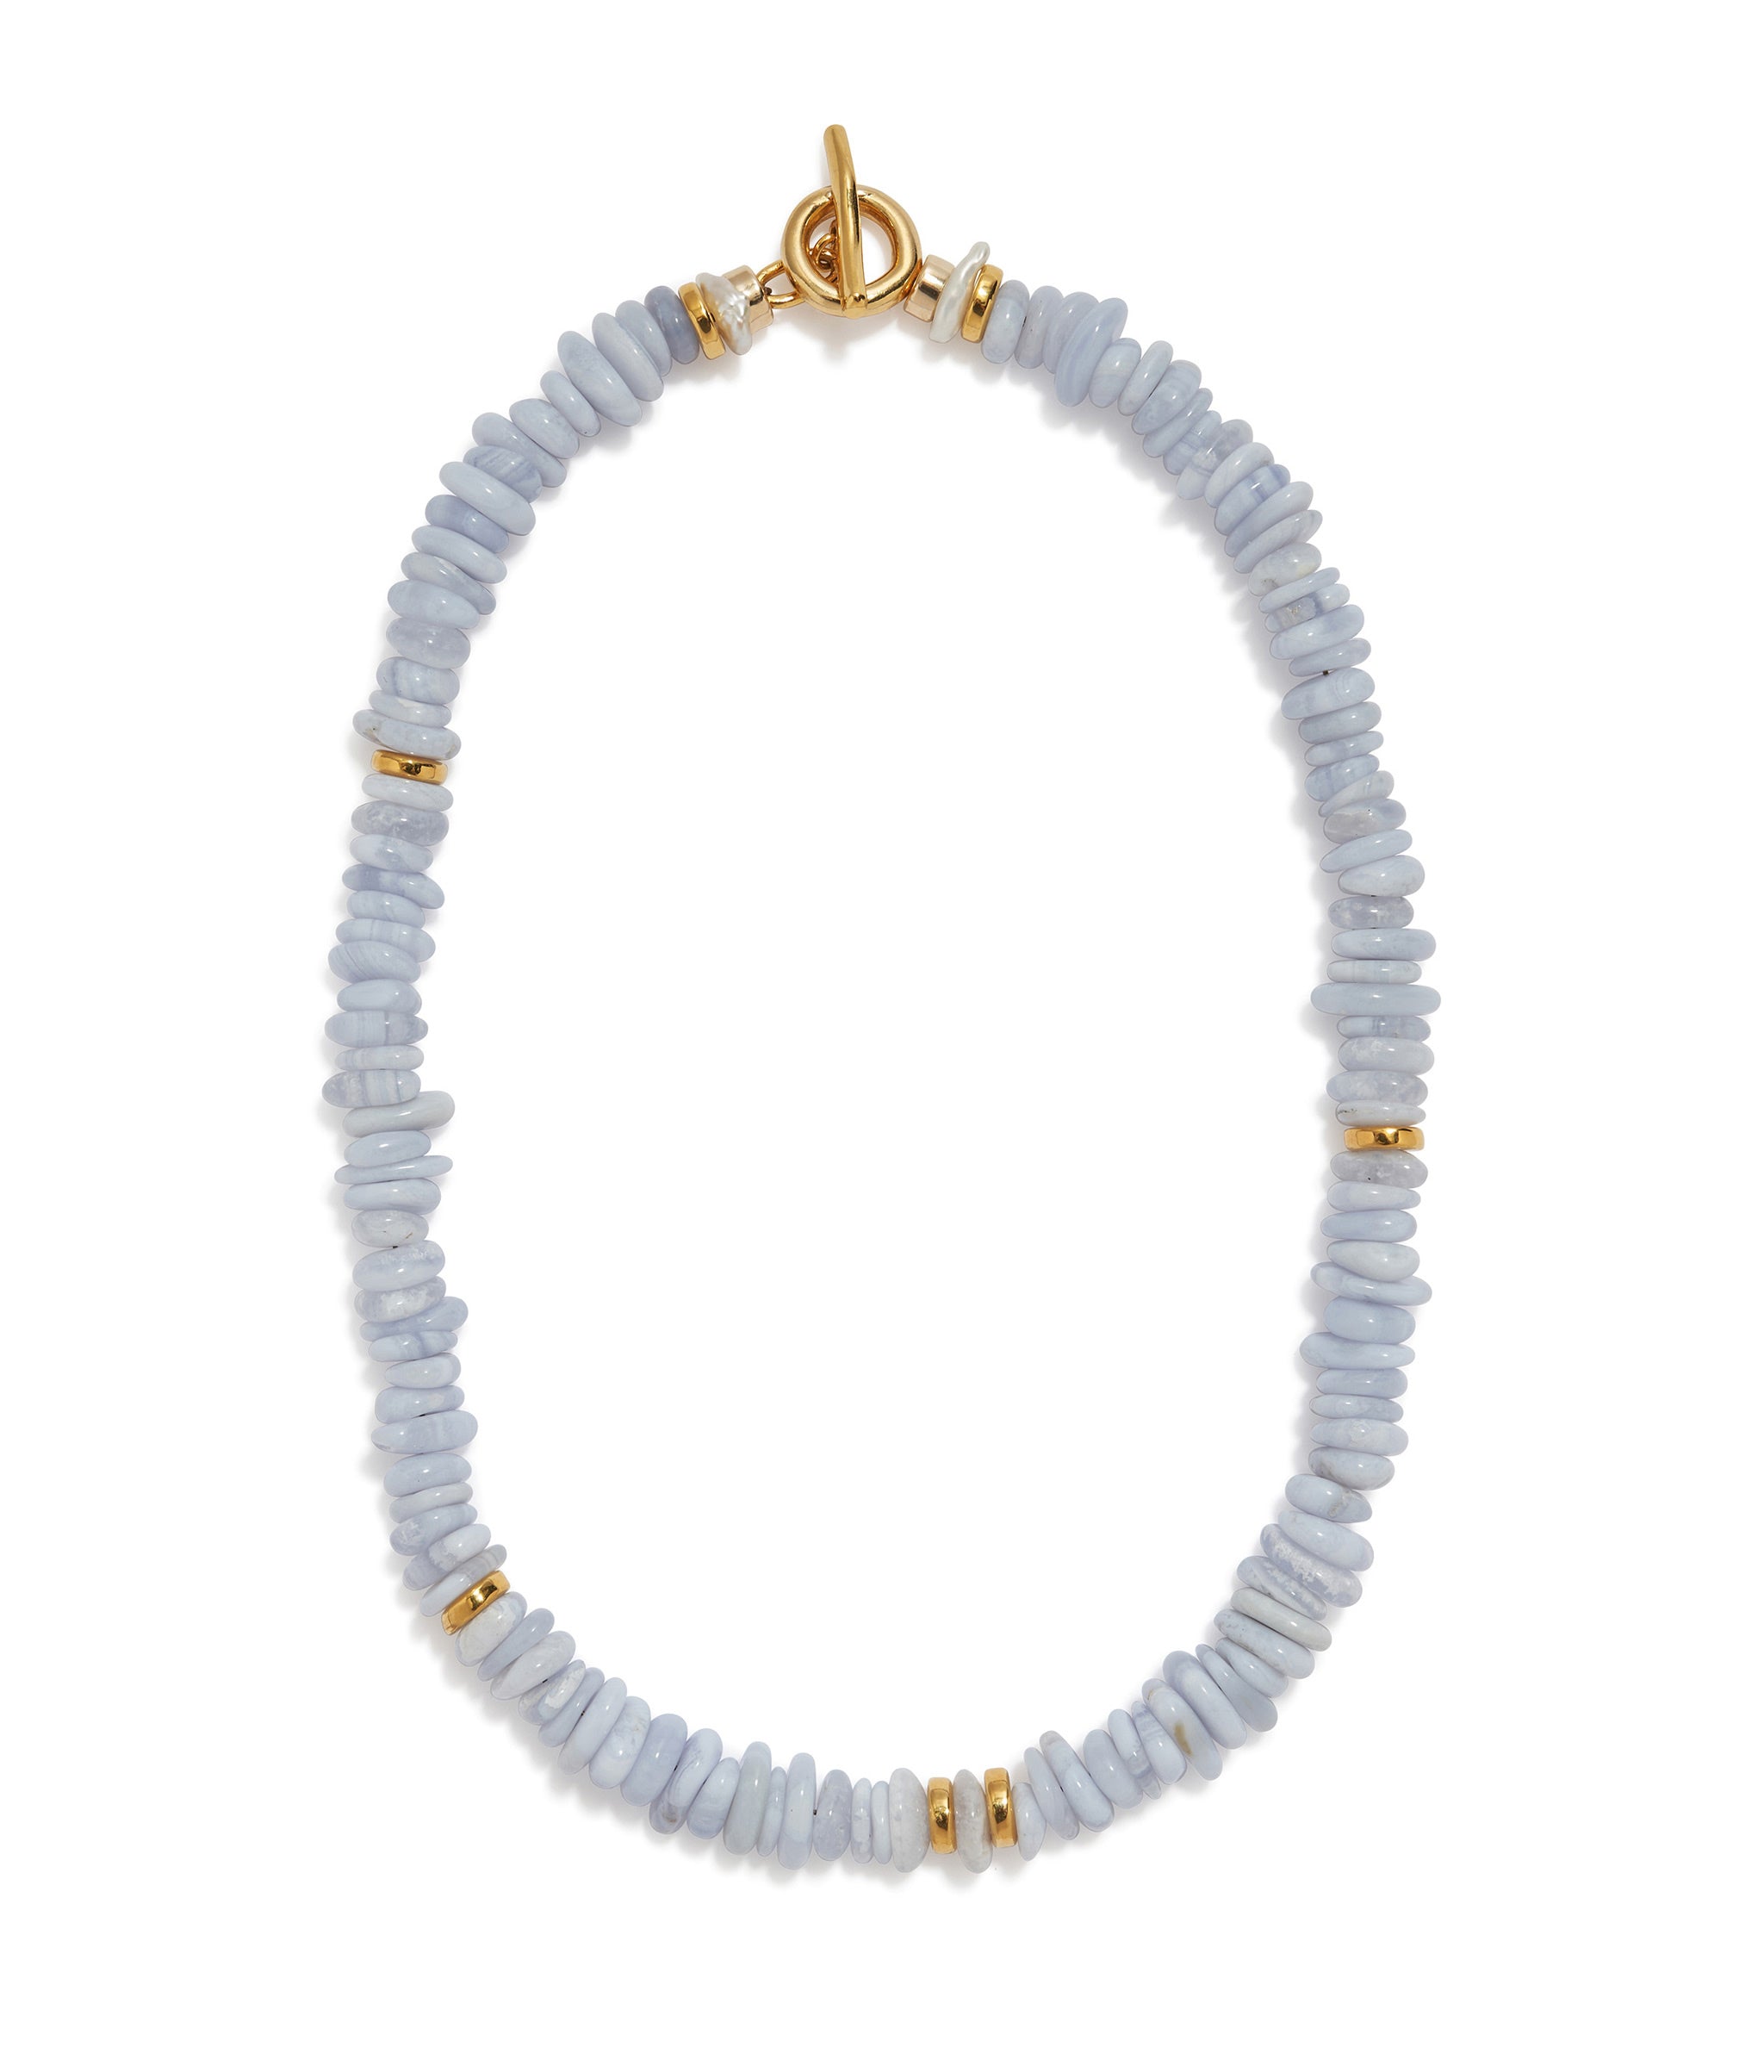 Mood Necklace in Blue Lace Agate. Single-strand of light blue agate beads with gold-plated brass toggle closure.